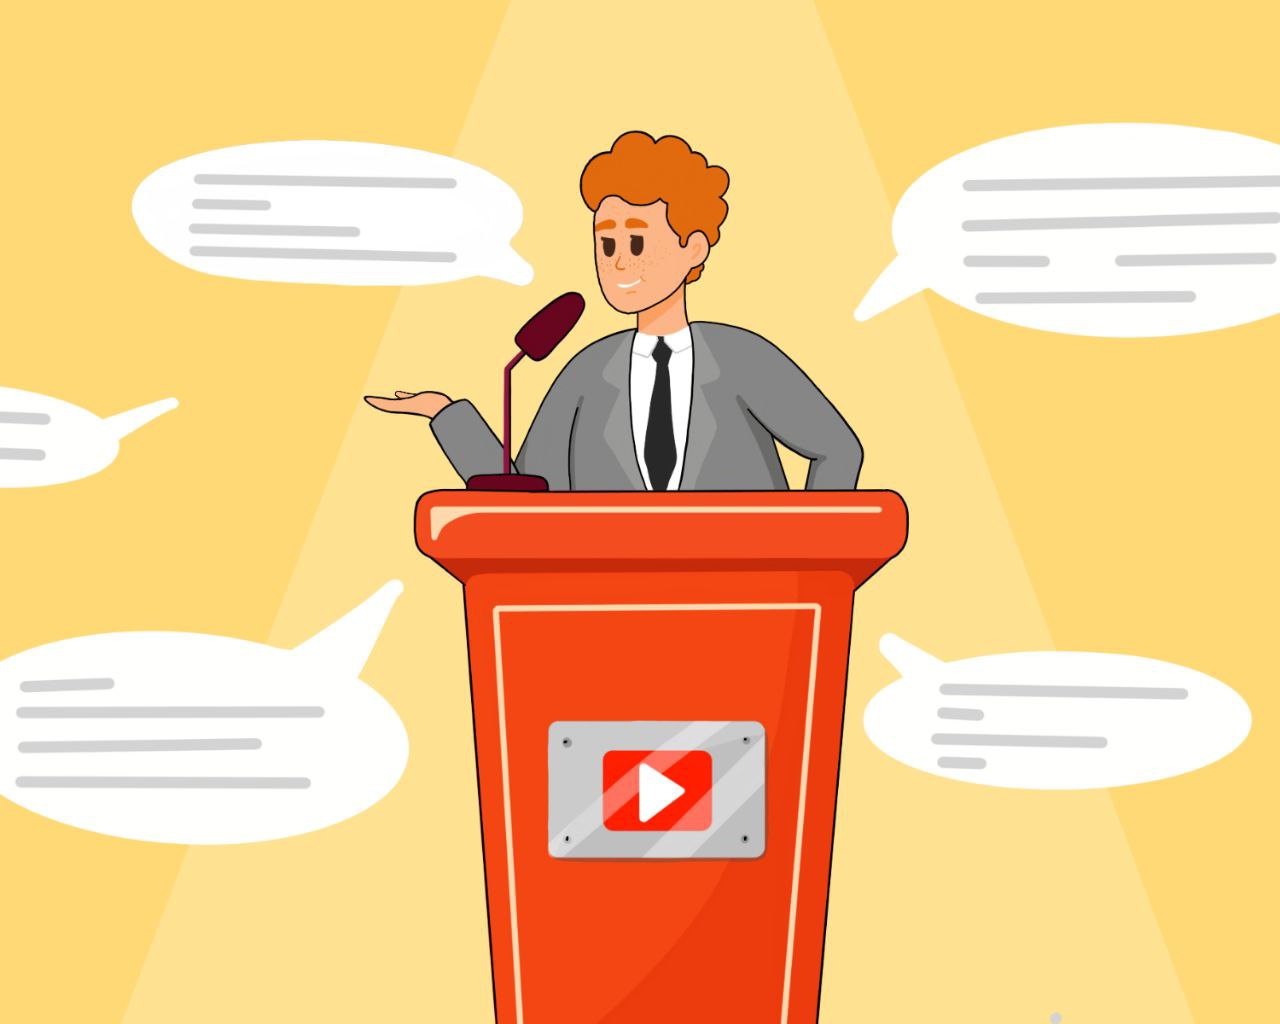 How To Improve Your Communication Skills For Effective YouTube Vlogging!